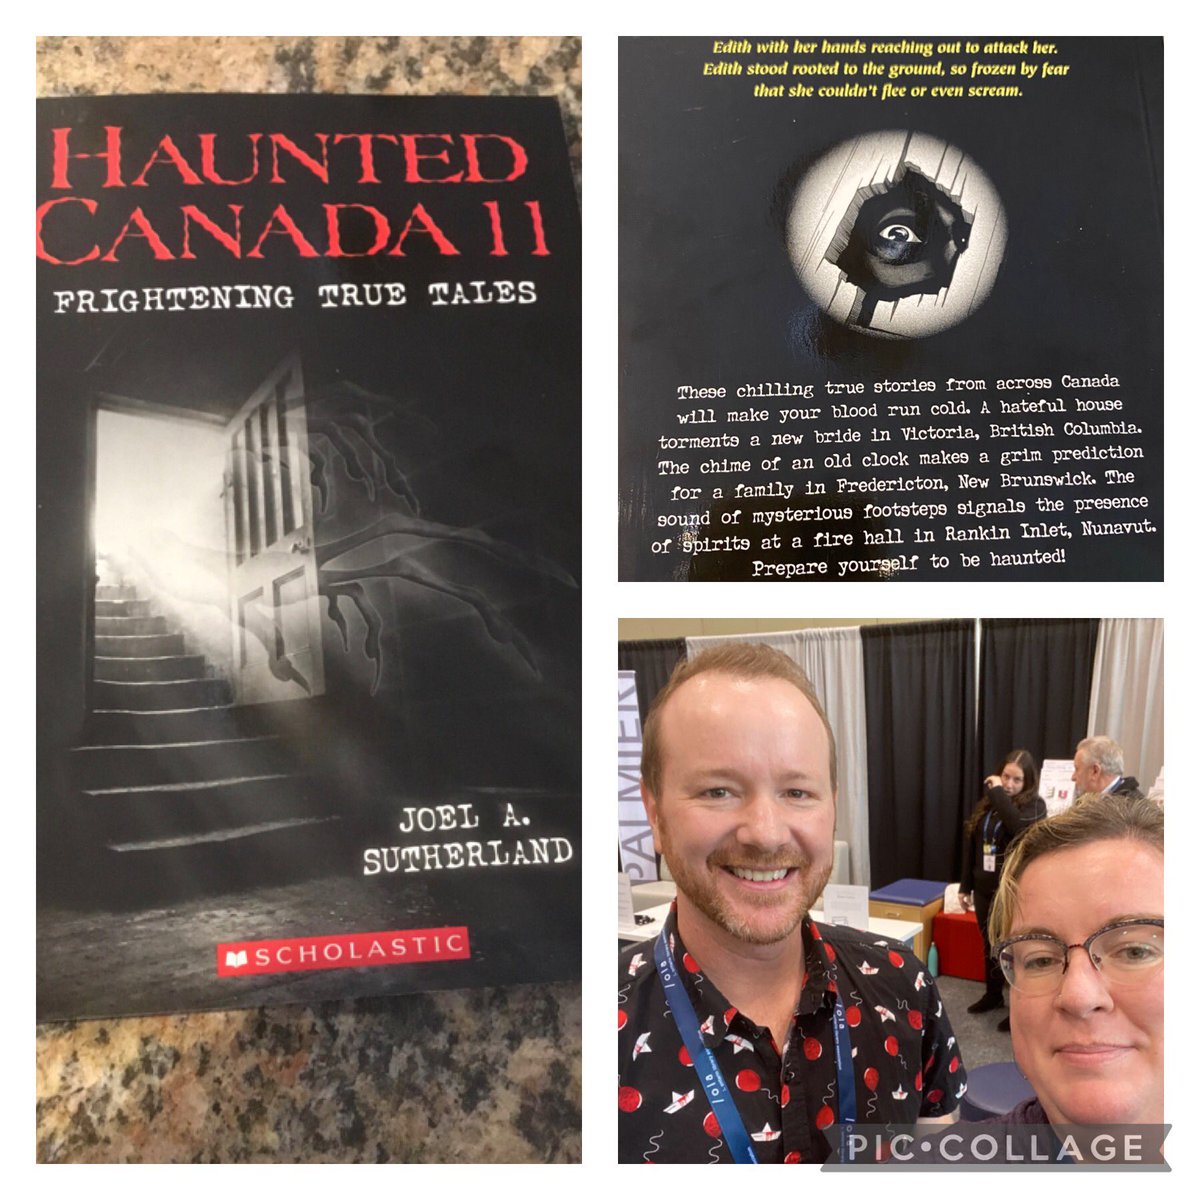 What an amazing time at the OLASC! Thank you for the opportunity to attend as a TL. The sessions, authors✍️,swag & EXPO were fantastic. It was an exhaustingly satisfying adventure for this book 📚 lover. @ONLibraryAssoc @oslacouncil #schoolibraryjoy #OLASC @MrsTBrown73 @gramaur